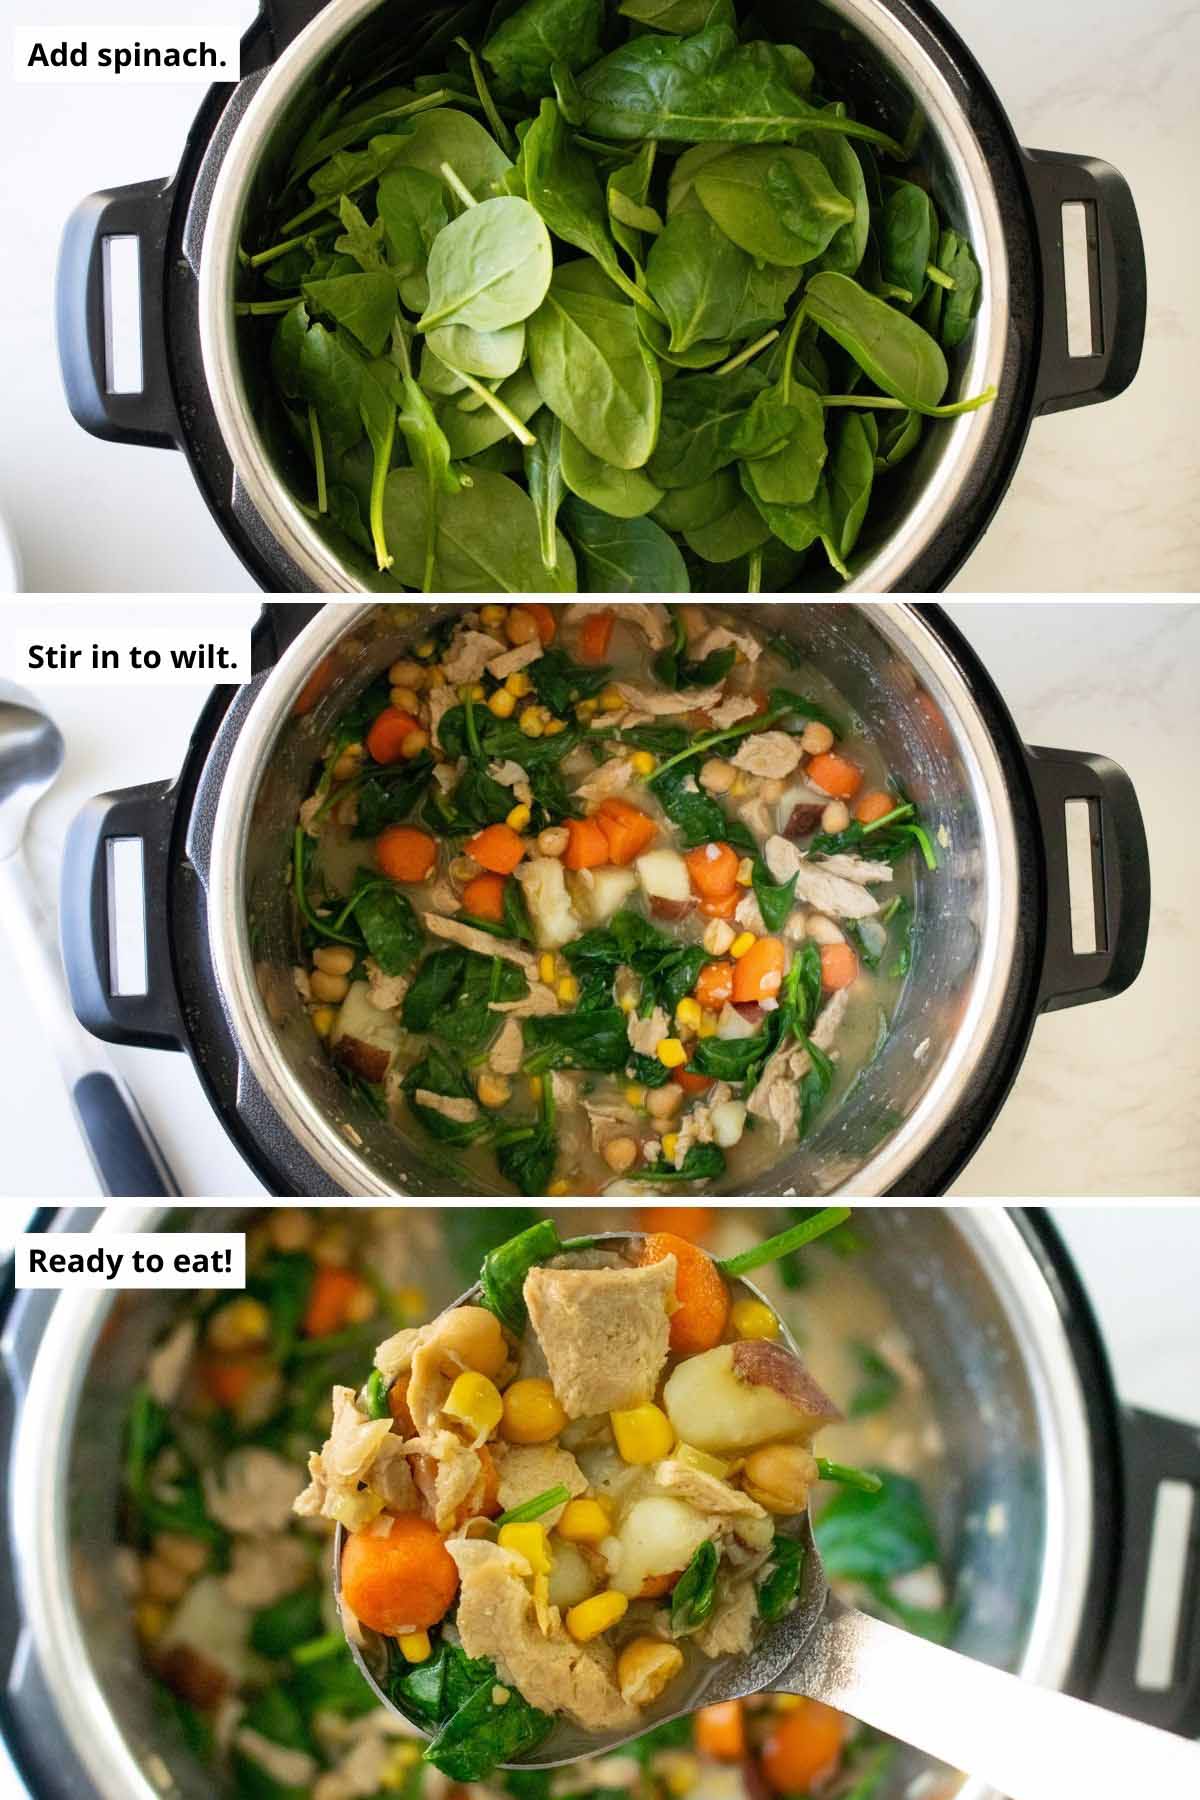 image collage showing the spinach in the Instant Pot before and after wilting and serving the vegan chicken stew with a ladle